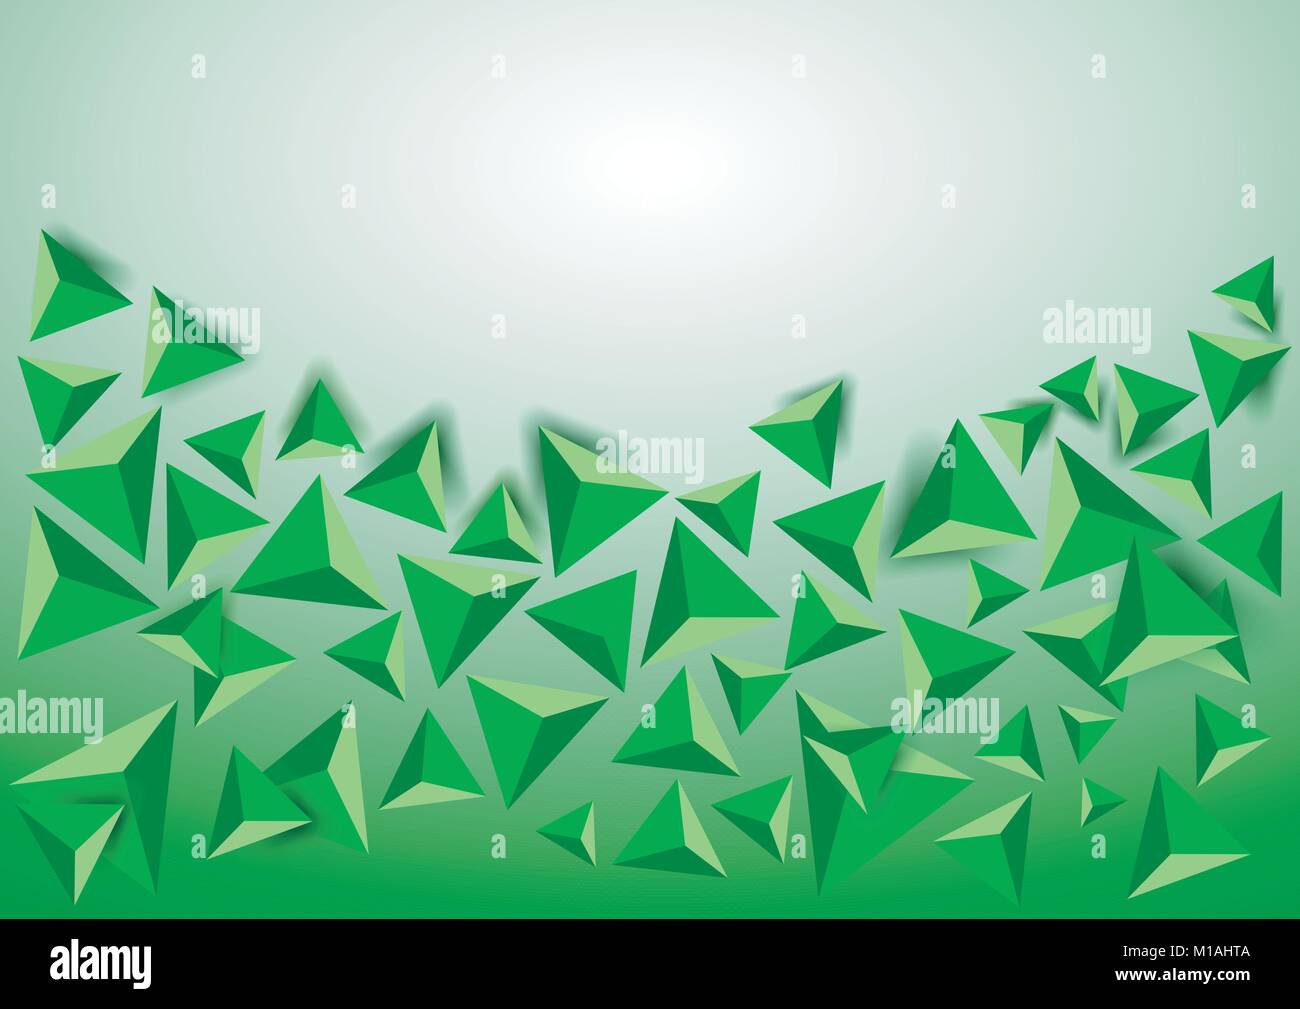 design vector of multiple triangle shapes with color and texture effect for background Stock Vector